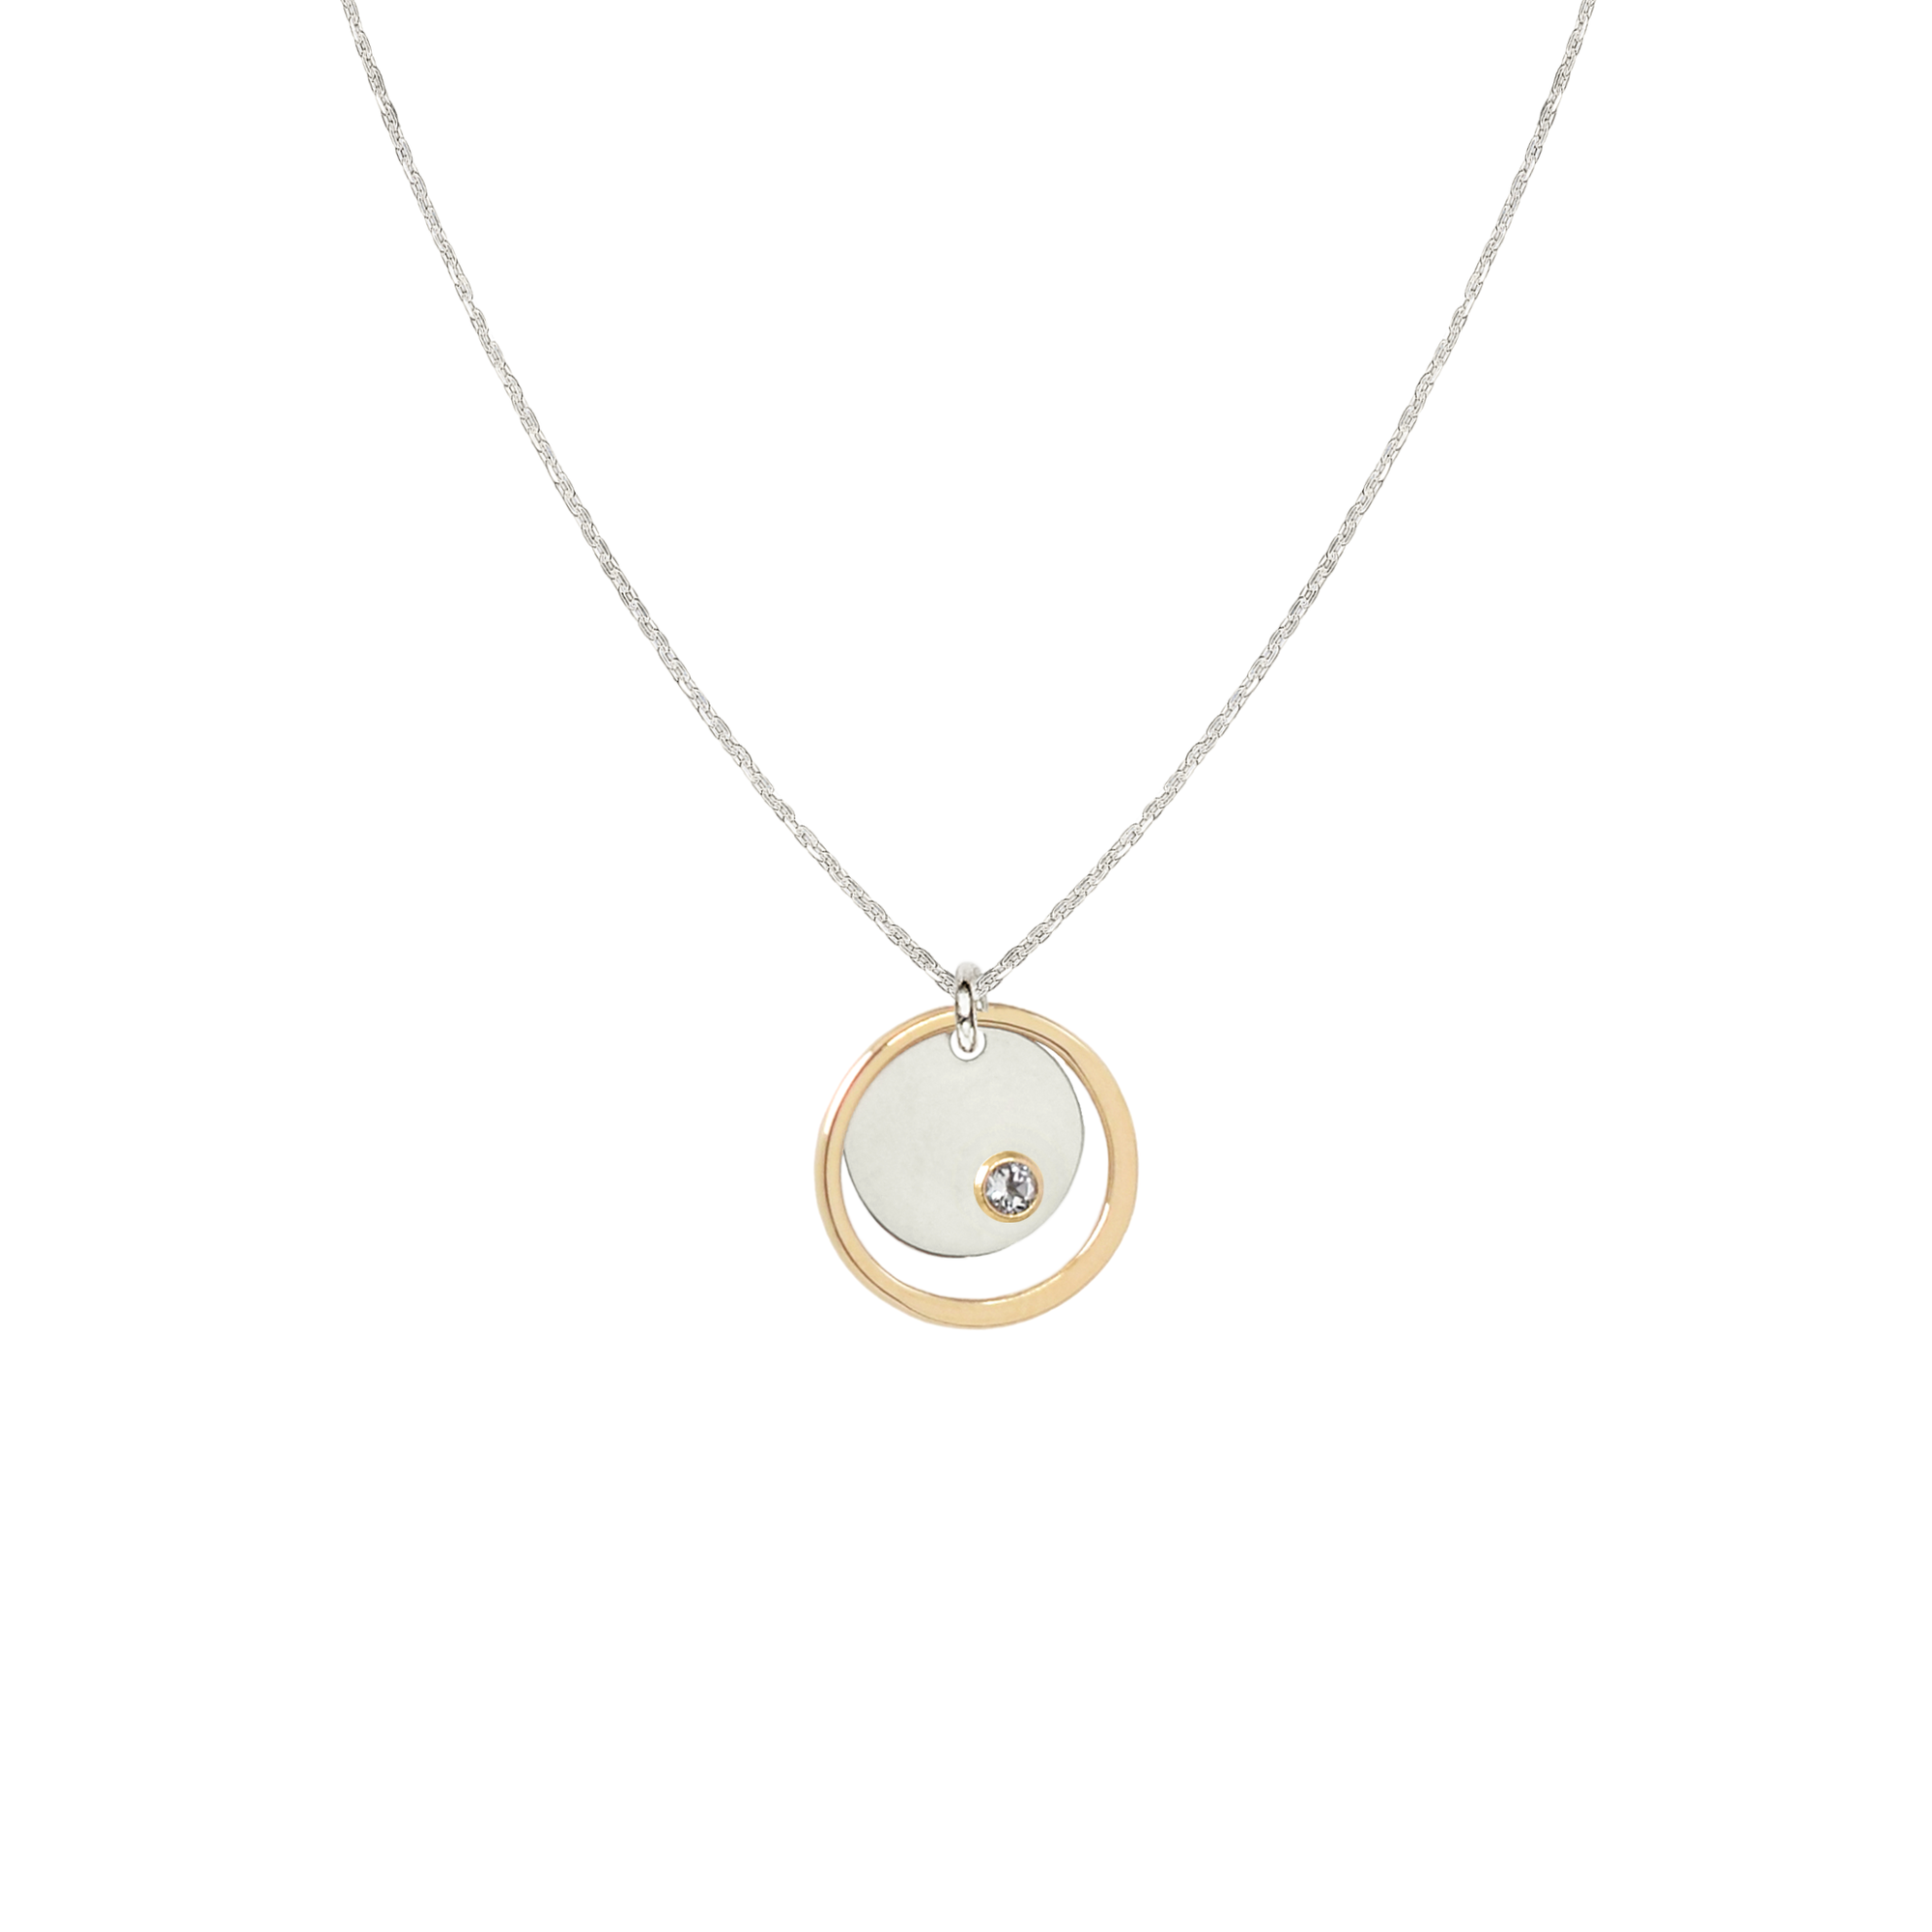 Celena Small Gold & Silver Disc Necklace with Gemstone